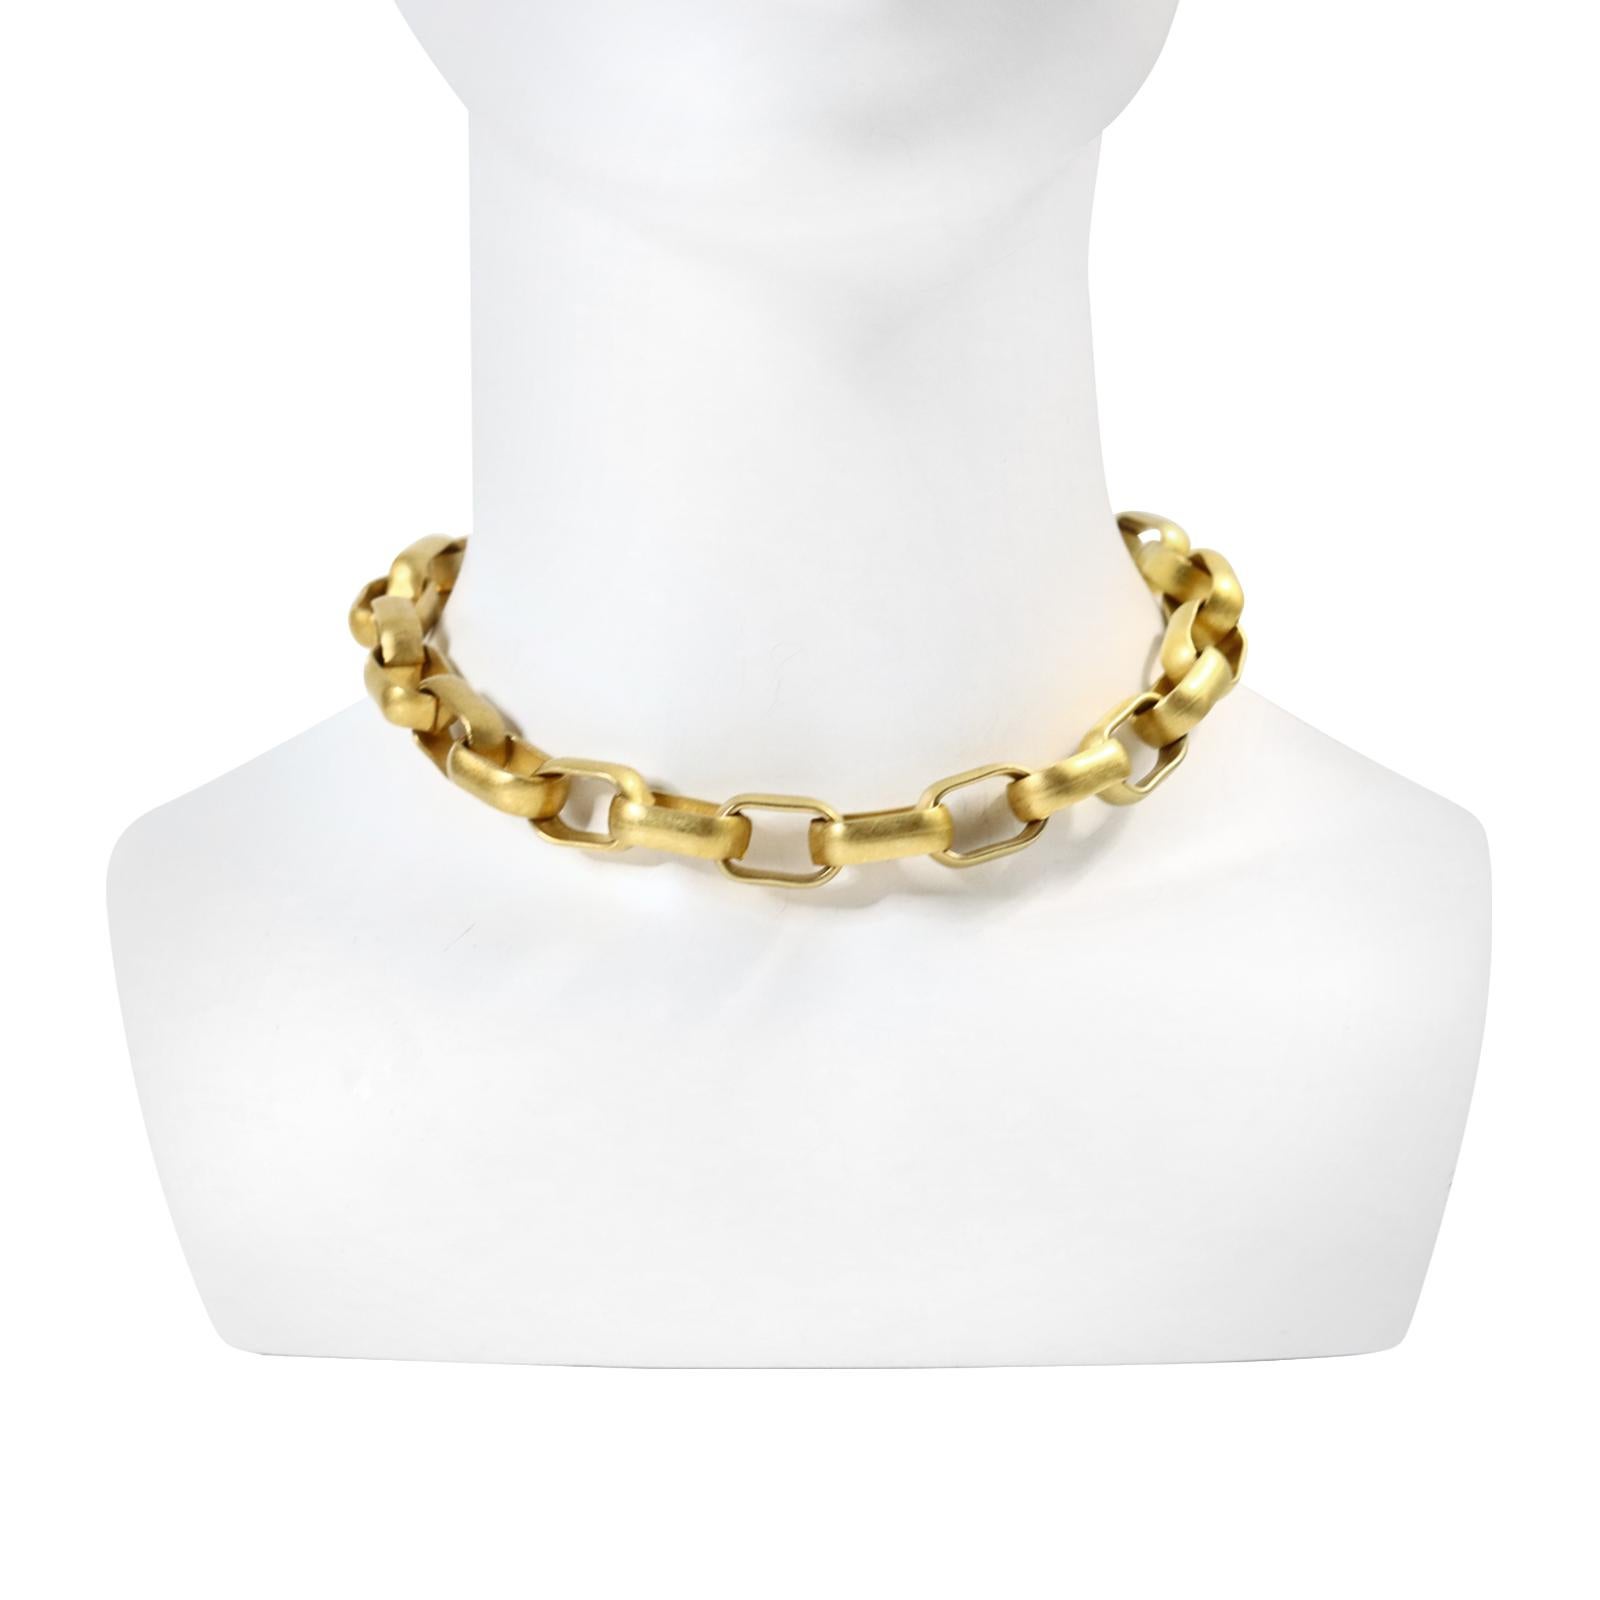 Vintage EP Matte Gold Tone Heavy Link Necklce Circa 1990s. Works well for everything. This necklace looks so great.